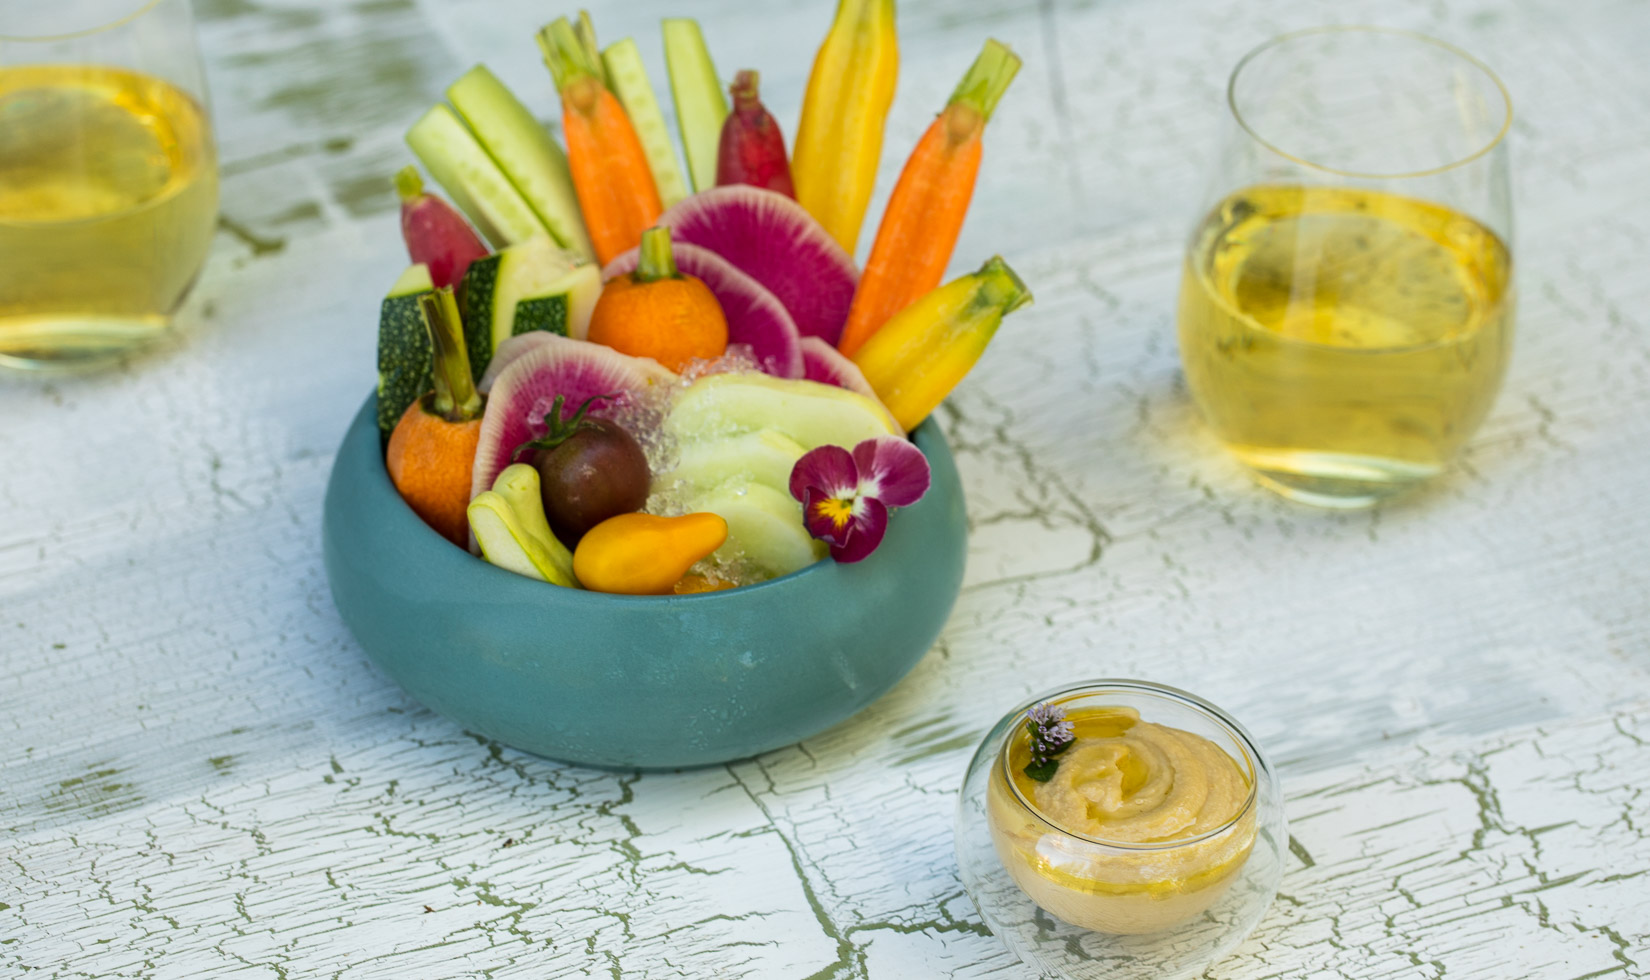 Authentic hummus dip with an assortment of crudite for a centerpiece